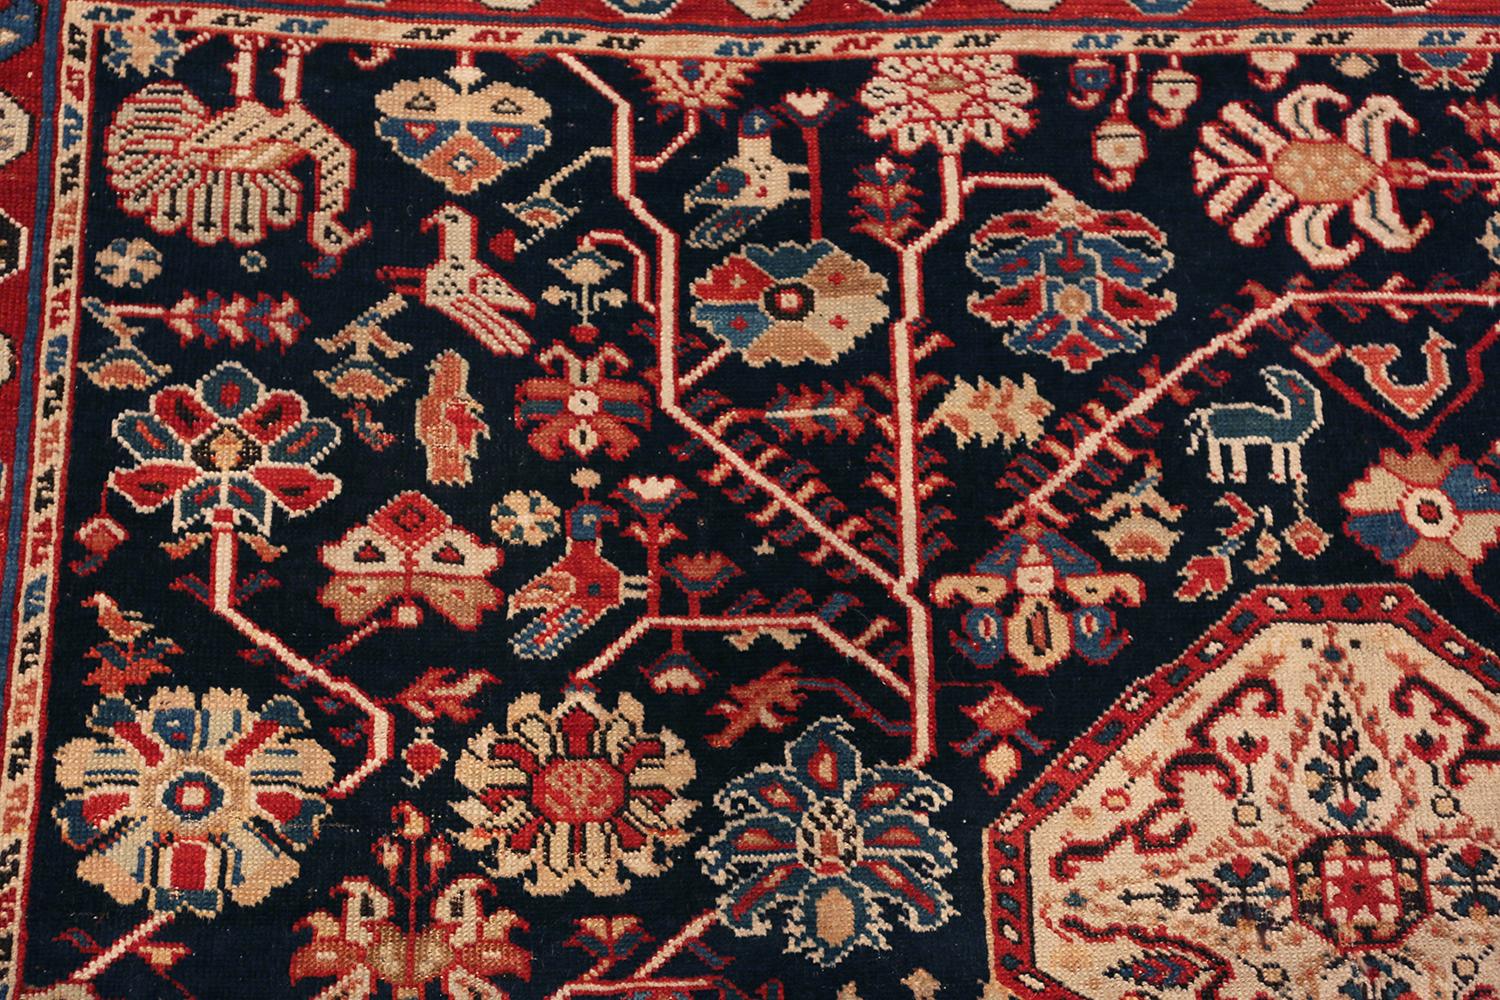 Tribal Nazmiyal Collection Antique Caucasian Baku Khila Rug. 6 ft 7 in x 7 ft 10 in